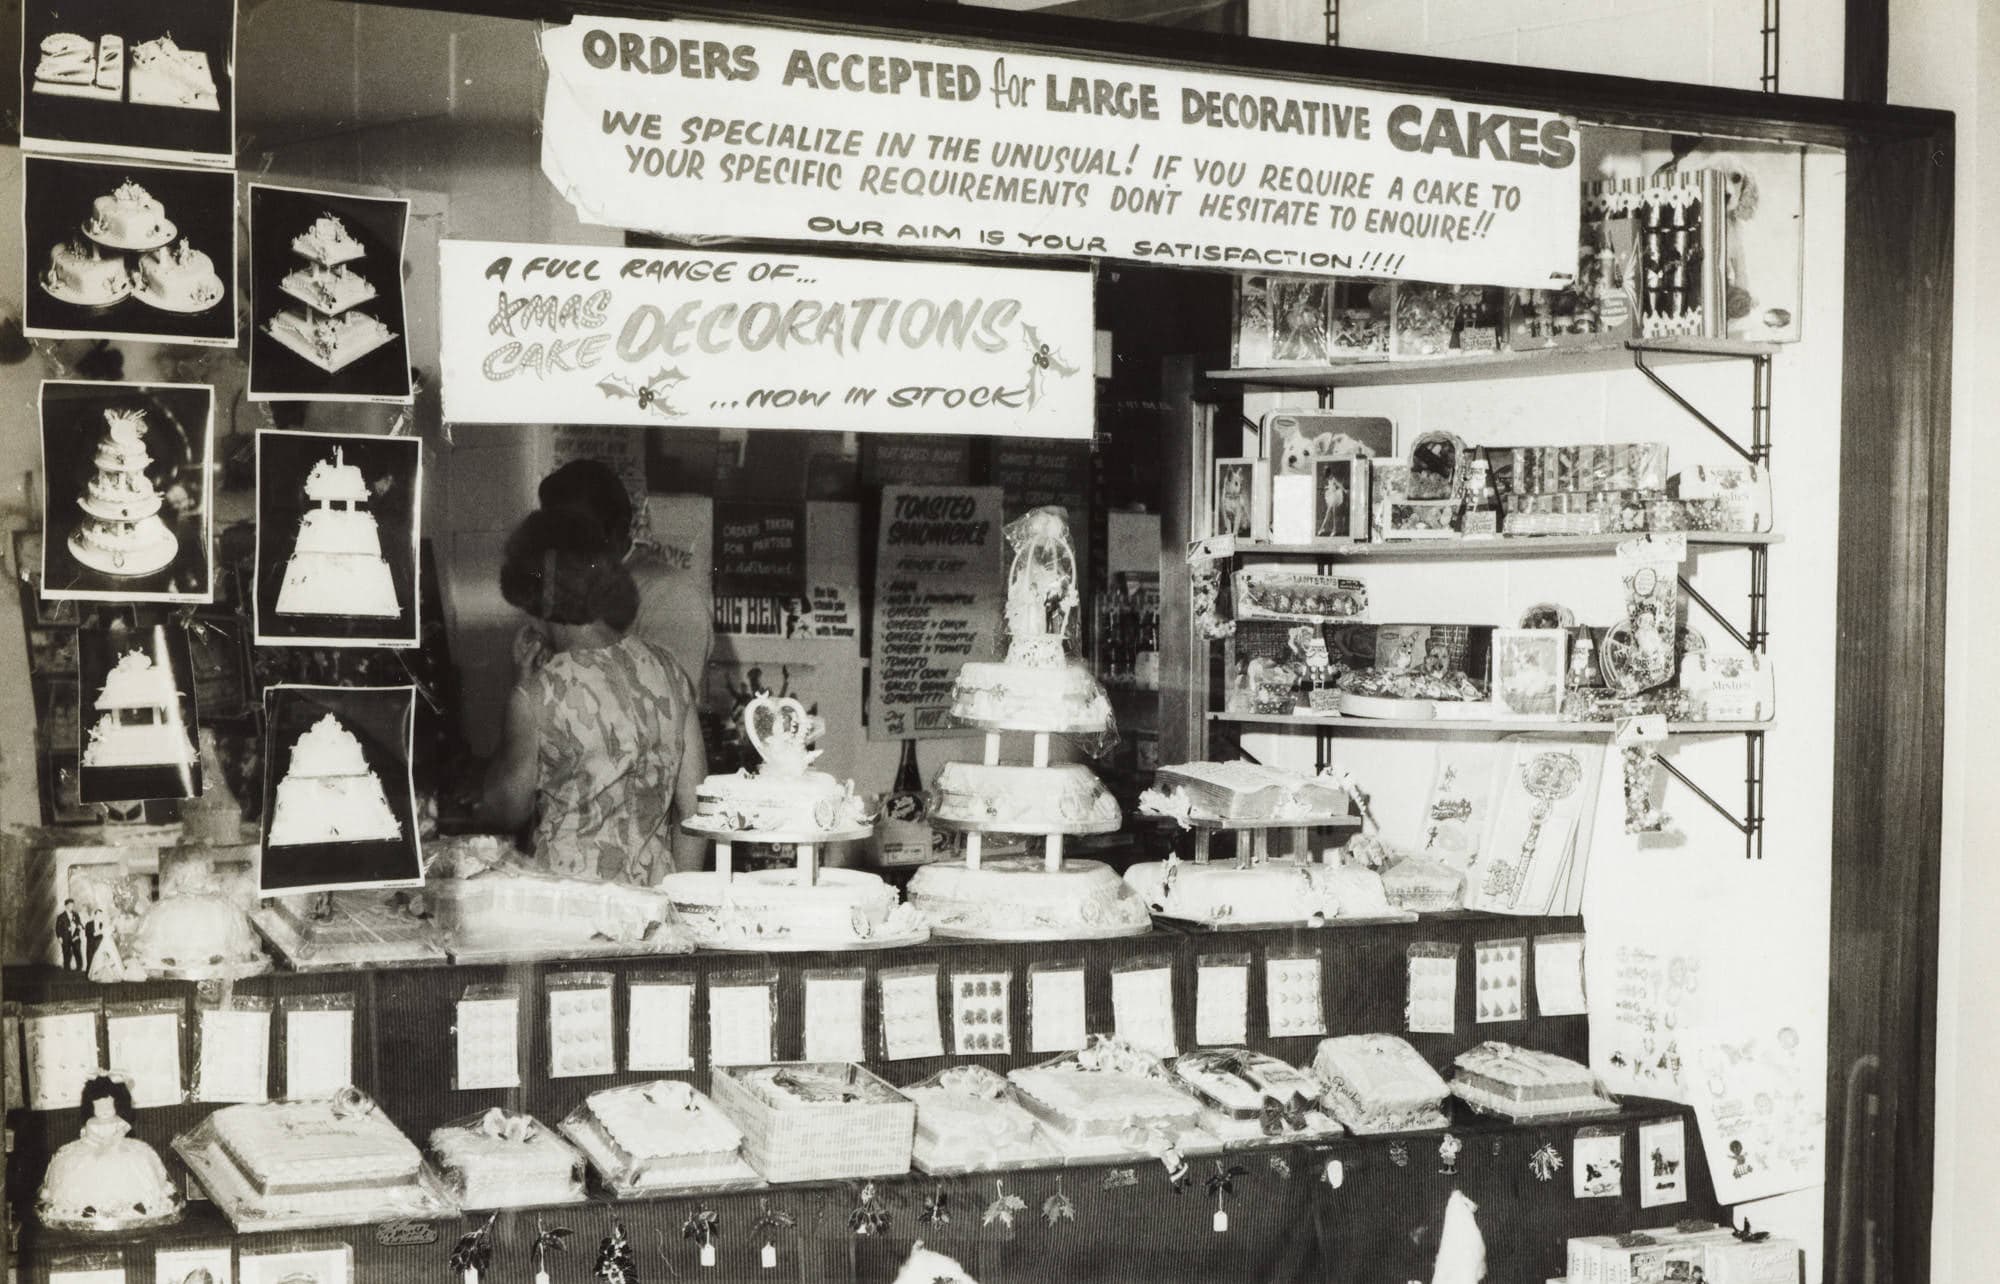 Eileen Faulkner's cake store opened up in the Auckland suburb of Ōtāhuhu in 1965.